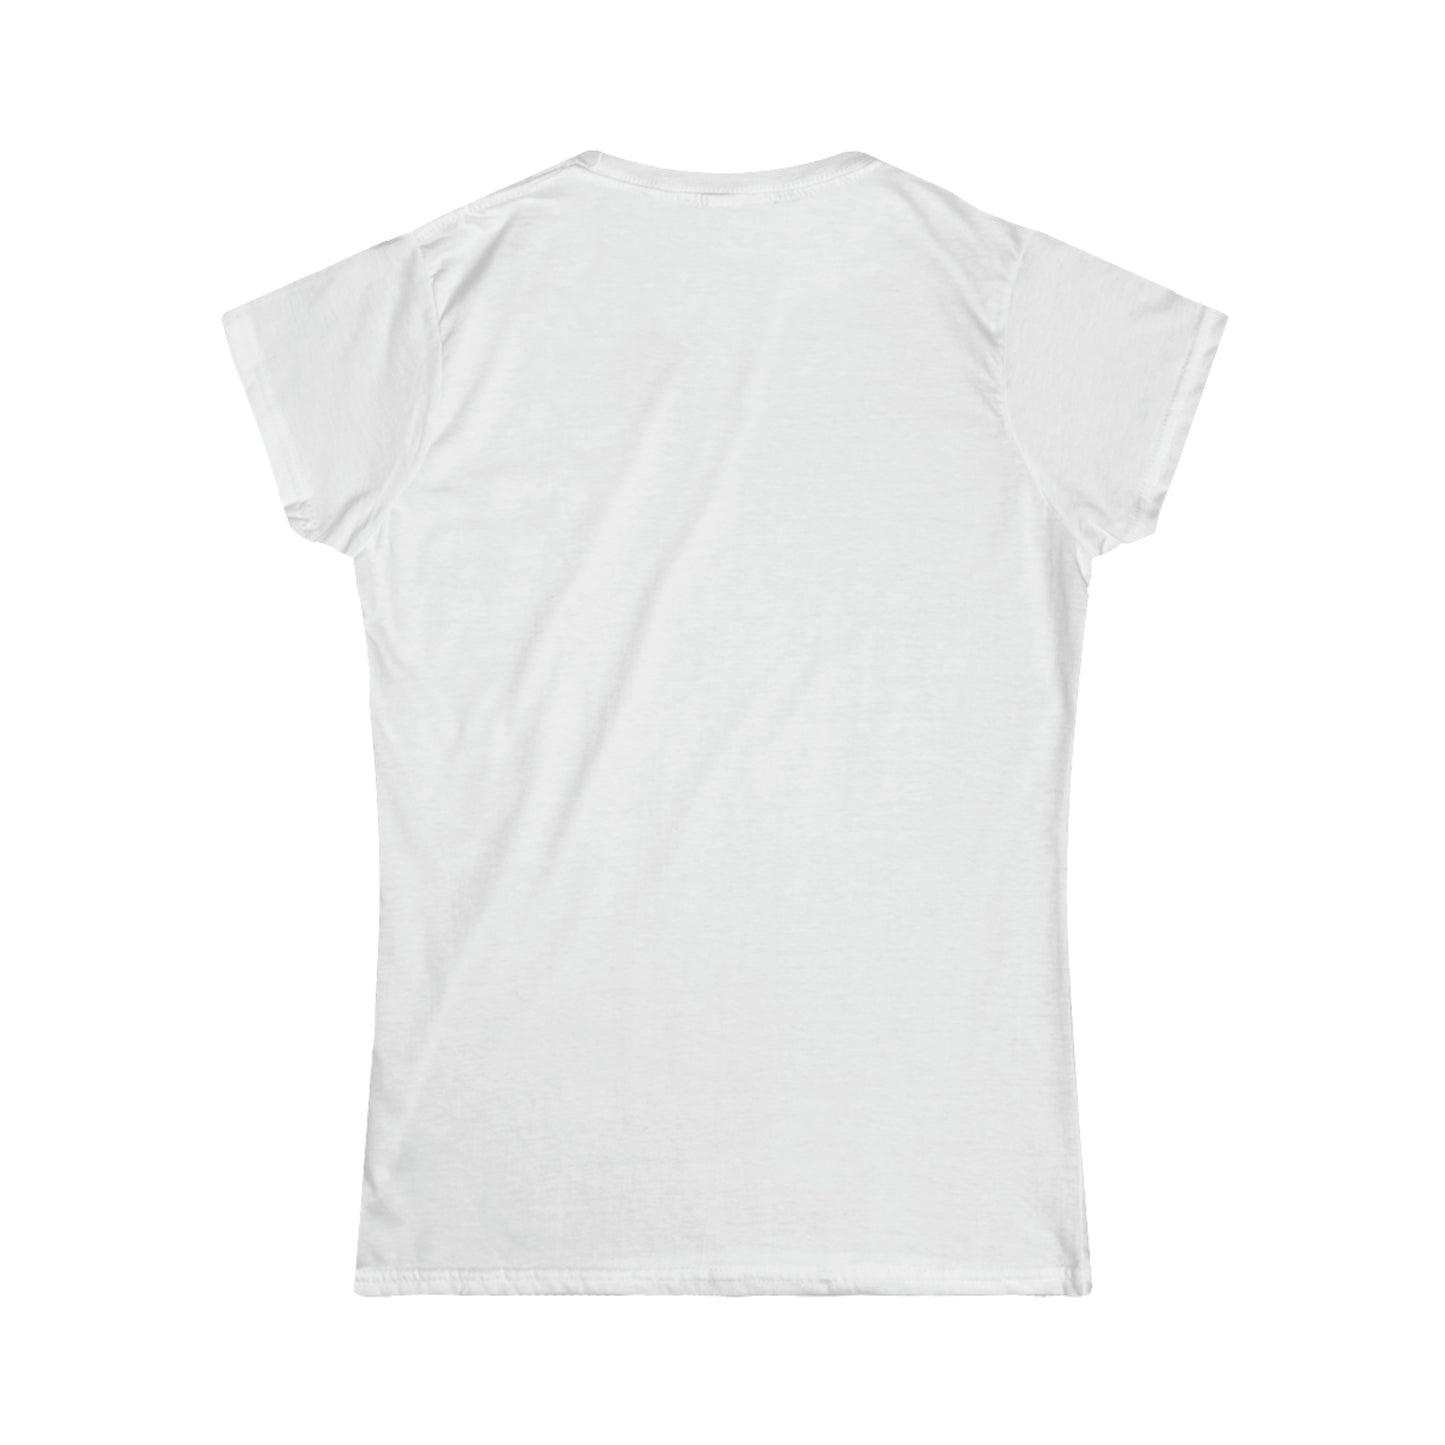 "Pose" Women's Softstyle Tee